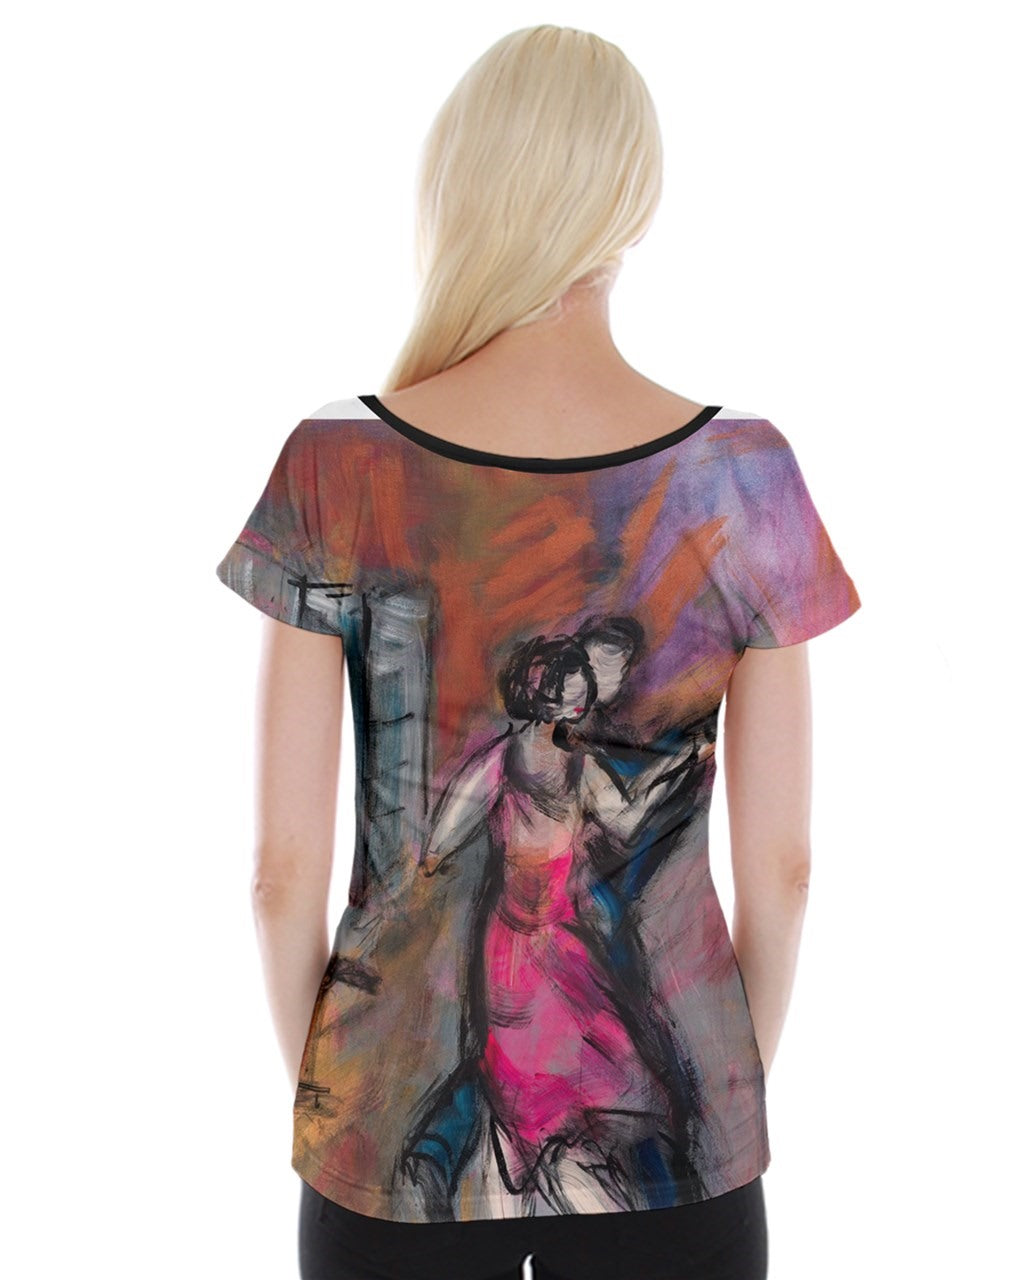 Feel the Movement: Leeorah's Dancers Captured on this Stylish Tee. Back View